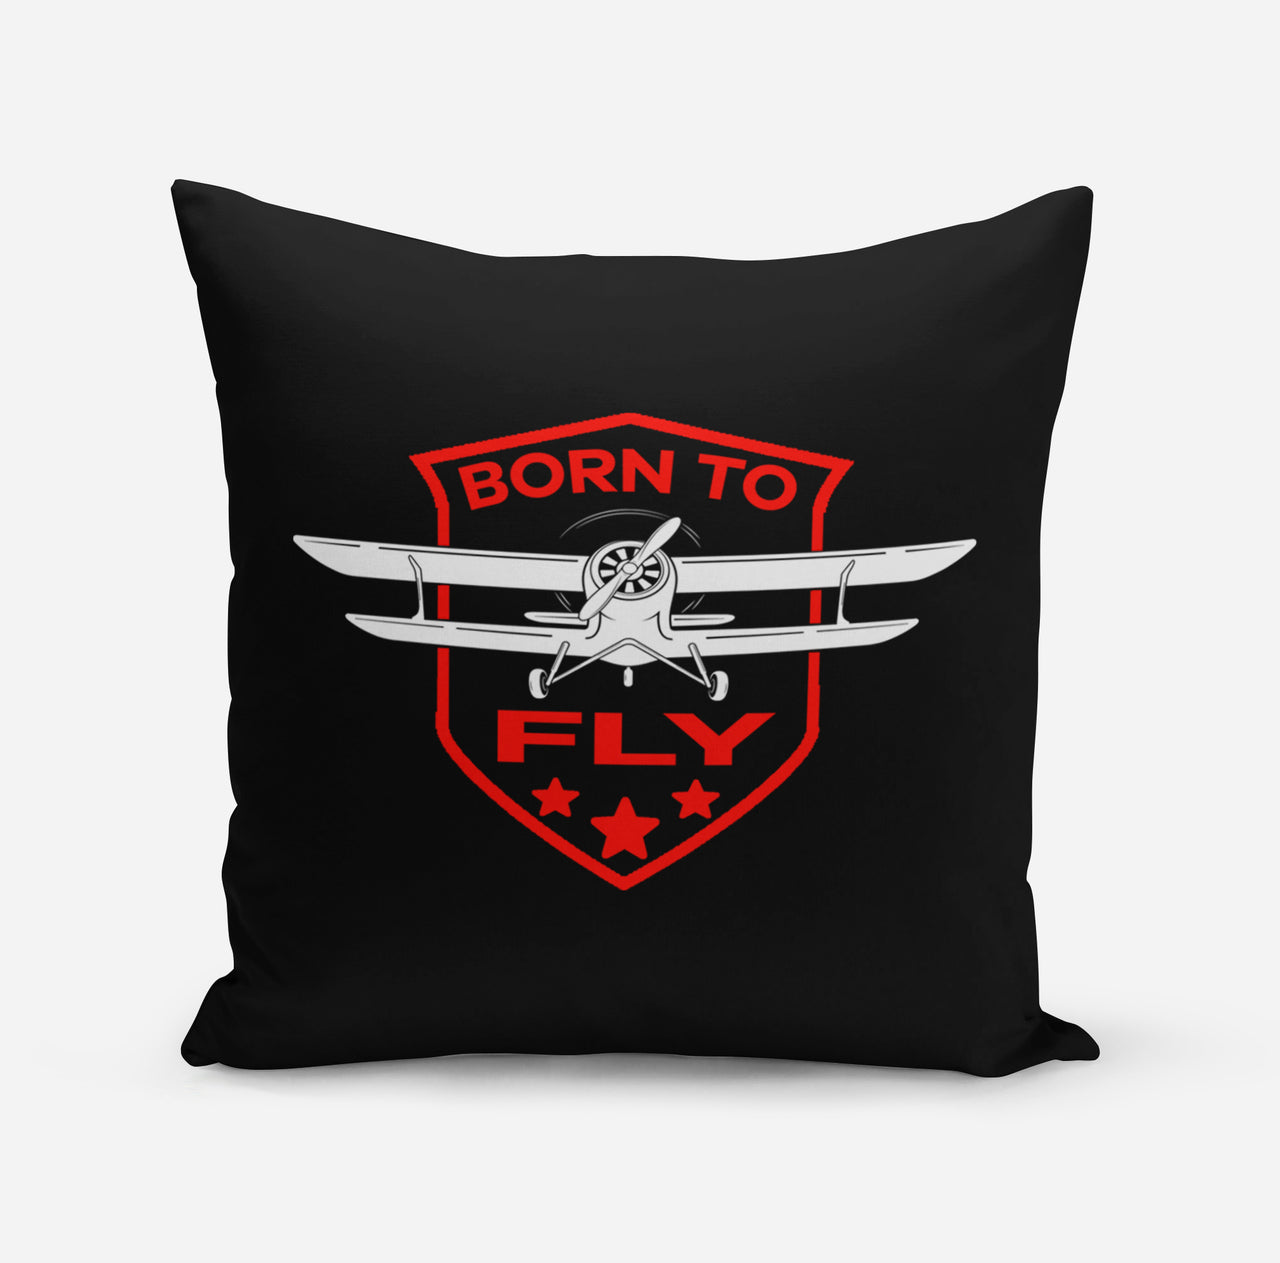 Born To Fly Designed Pillows